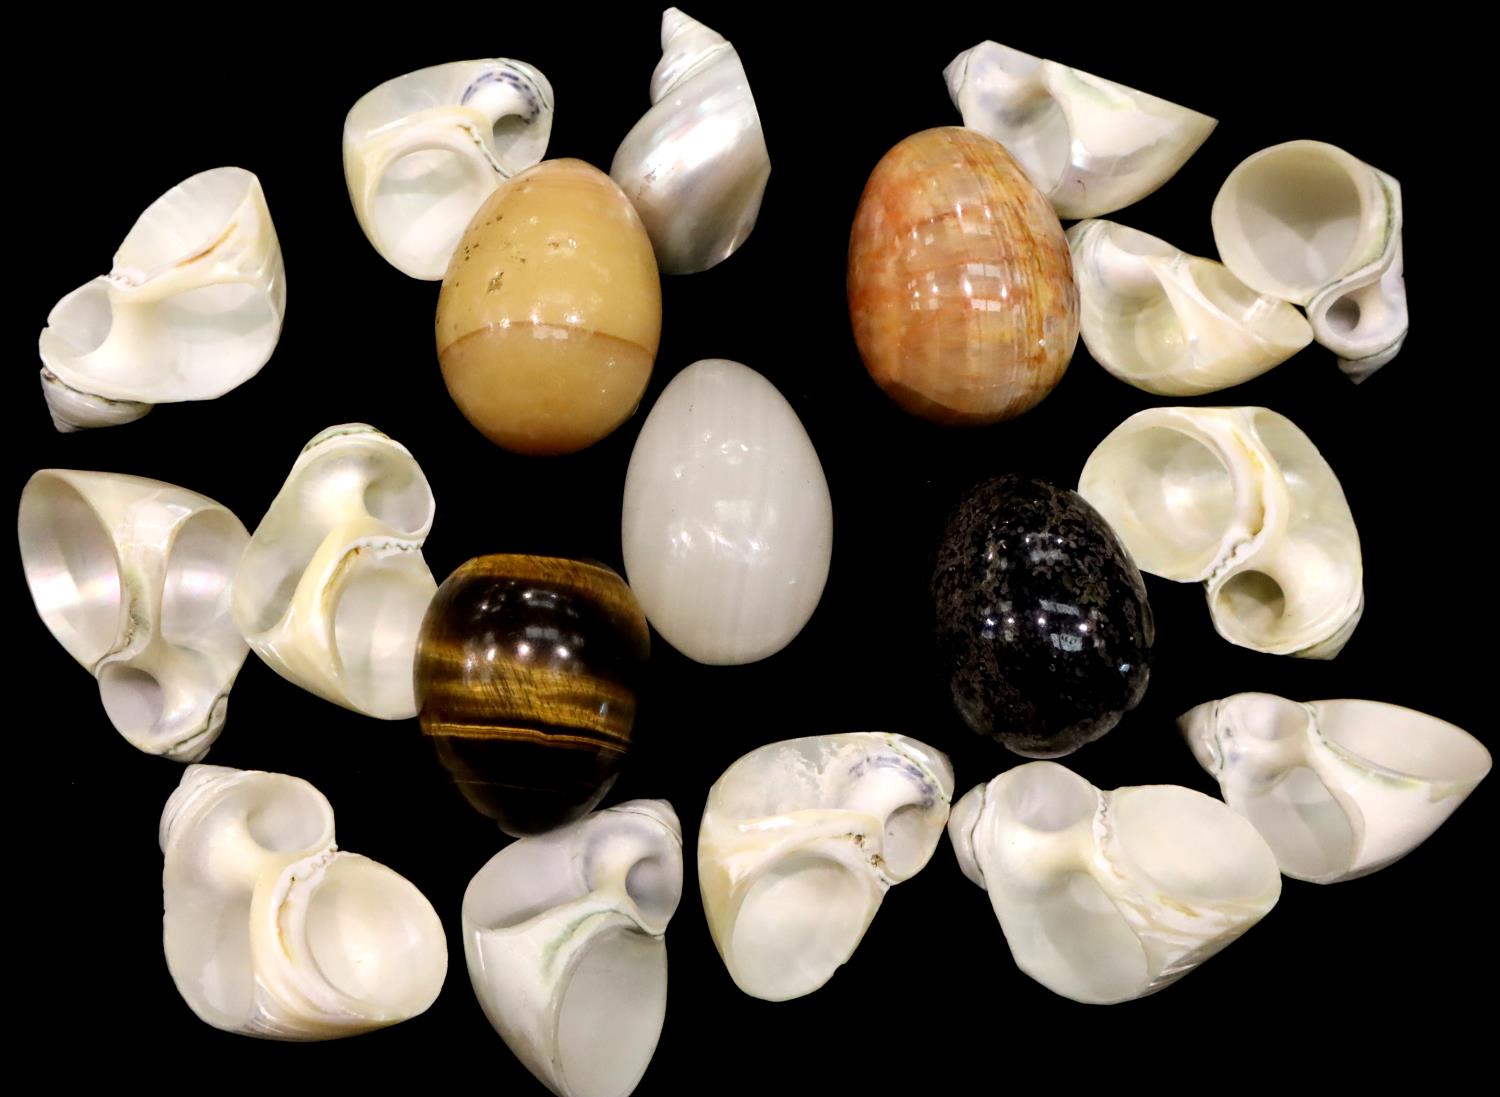 Collection of abalone sea shells and five polished hardstone eggs including a tigers eye example. - Image 2 of 2